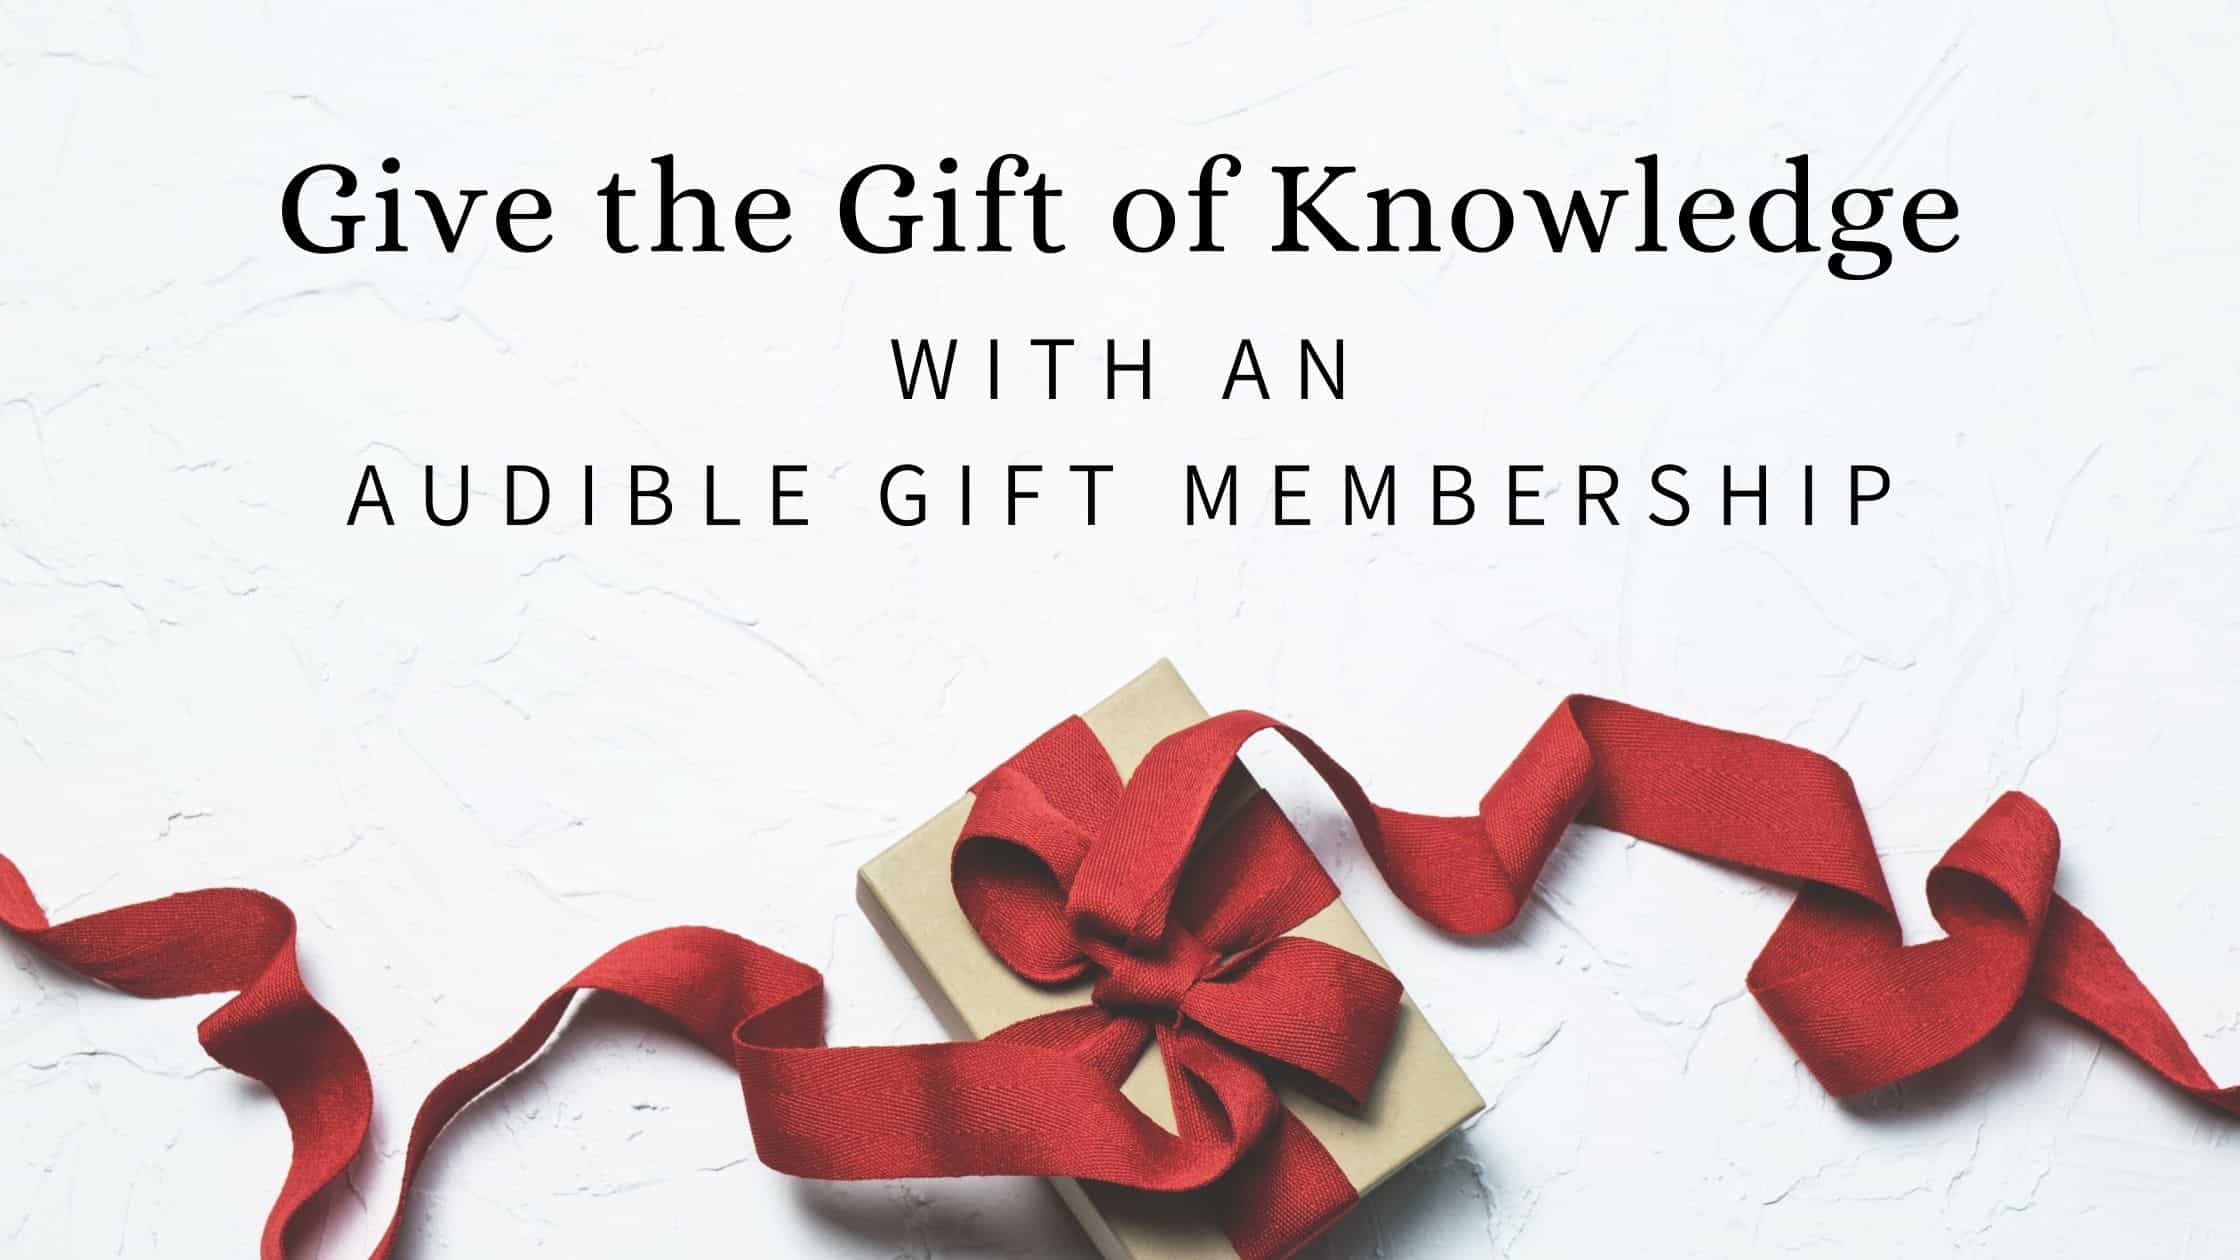 Give employees the gift of knowledge this holiday season.